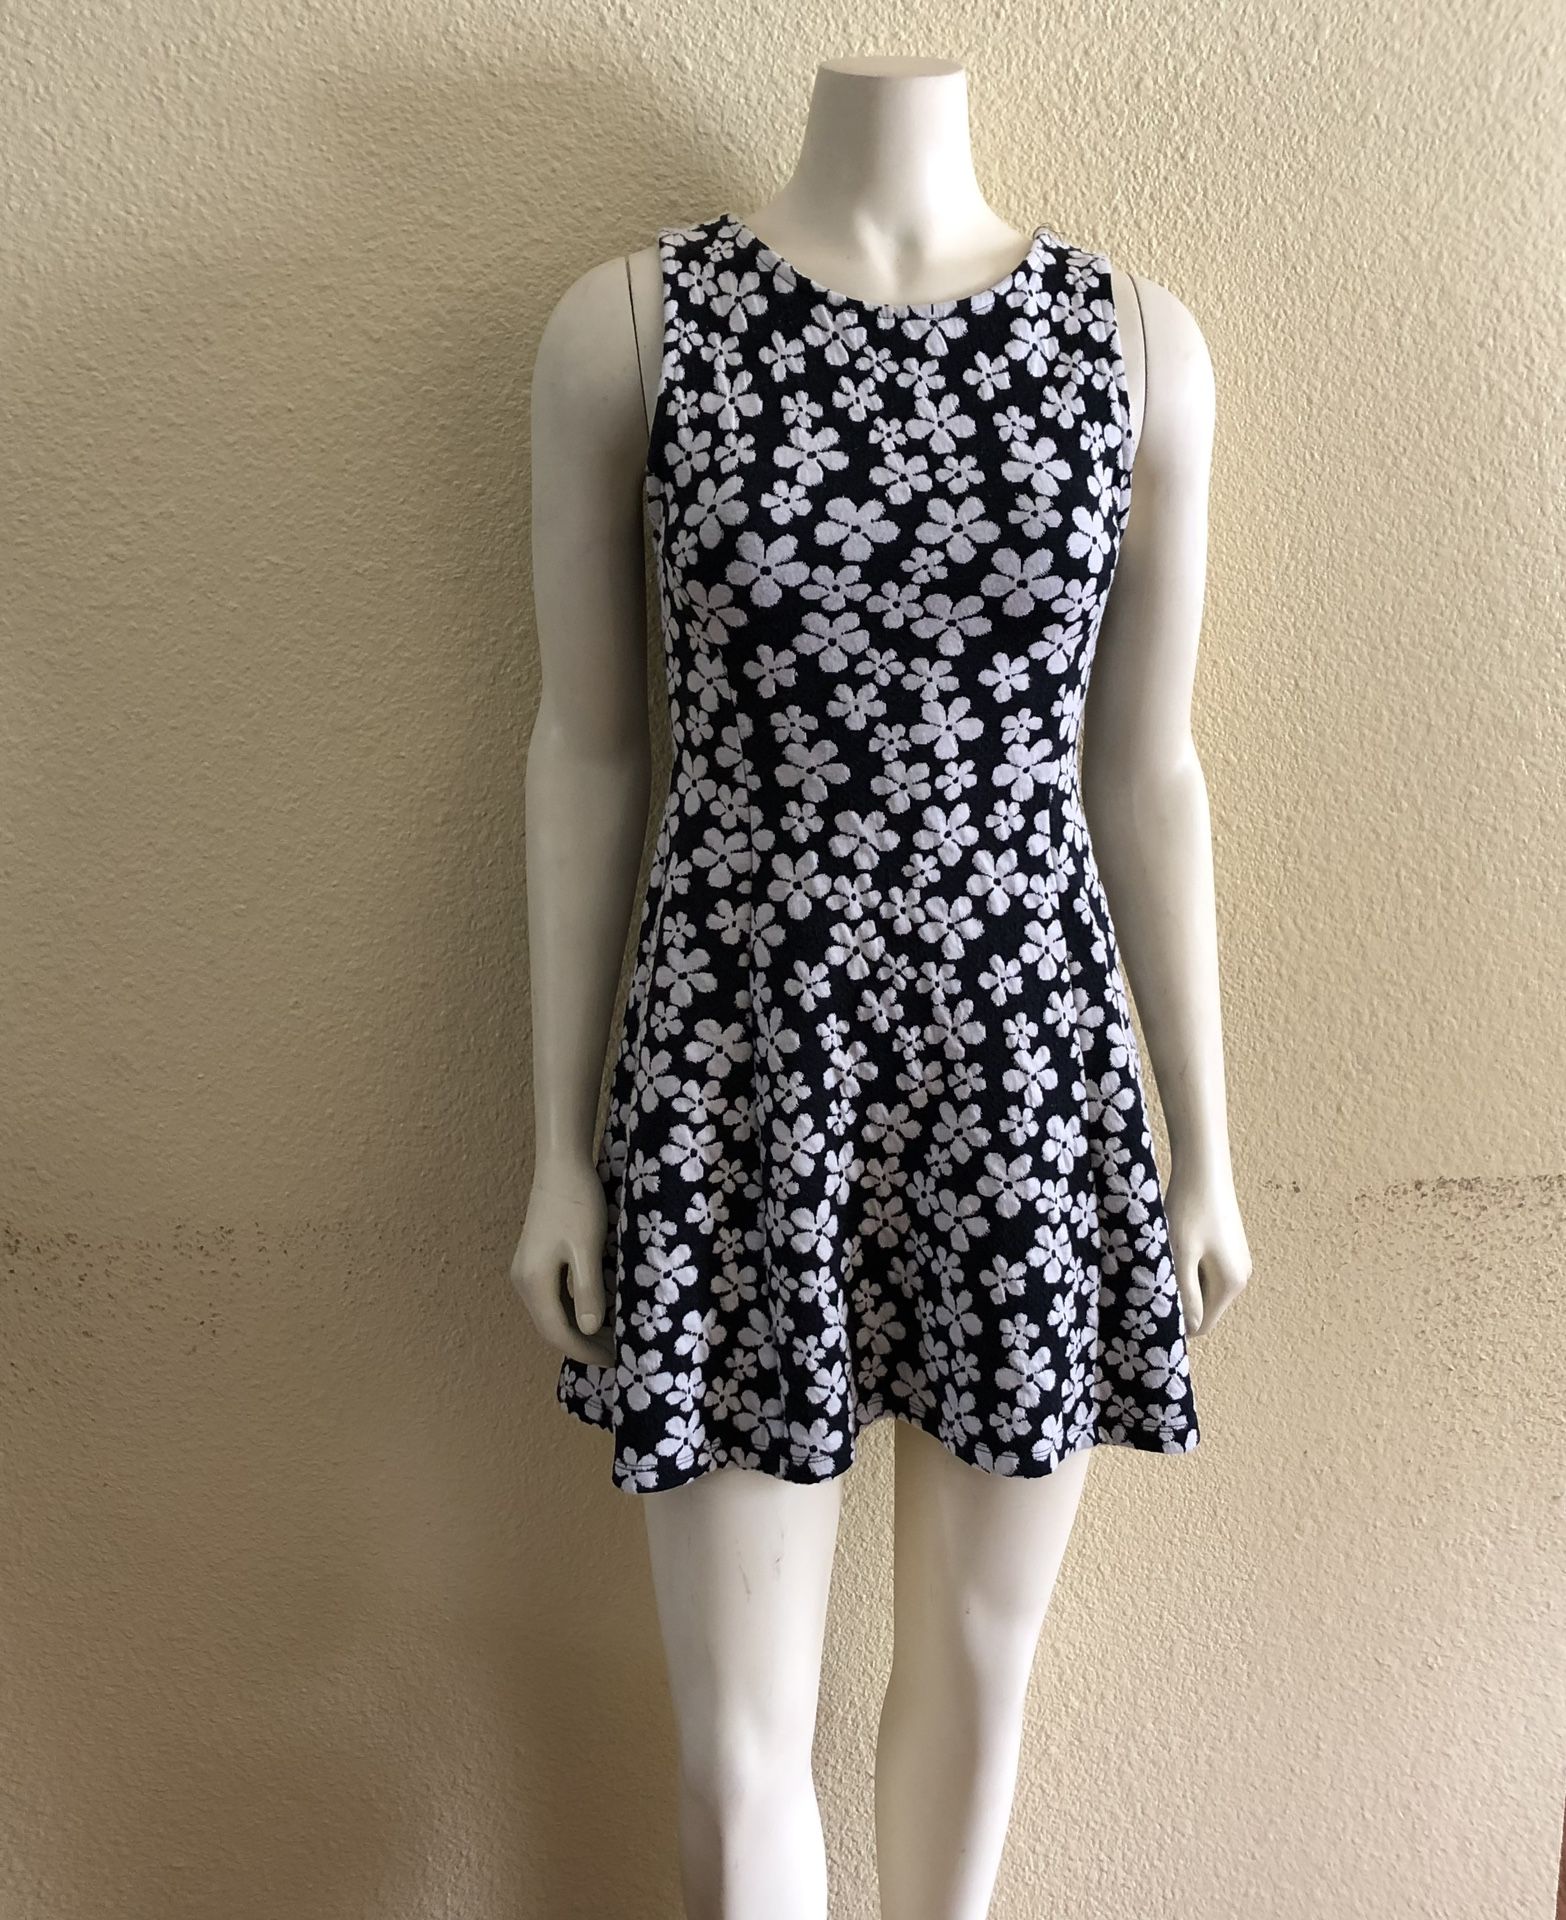 Divided by H&M Women’s Floral dress Size 6